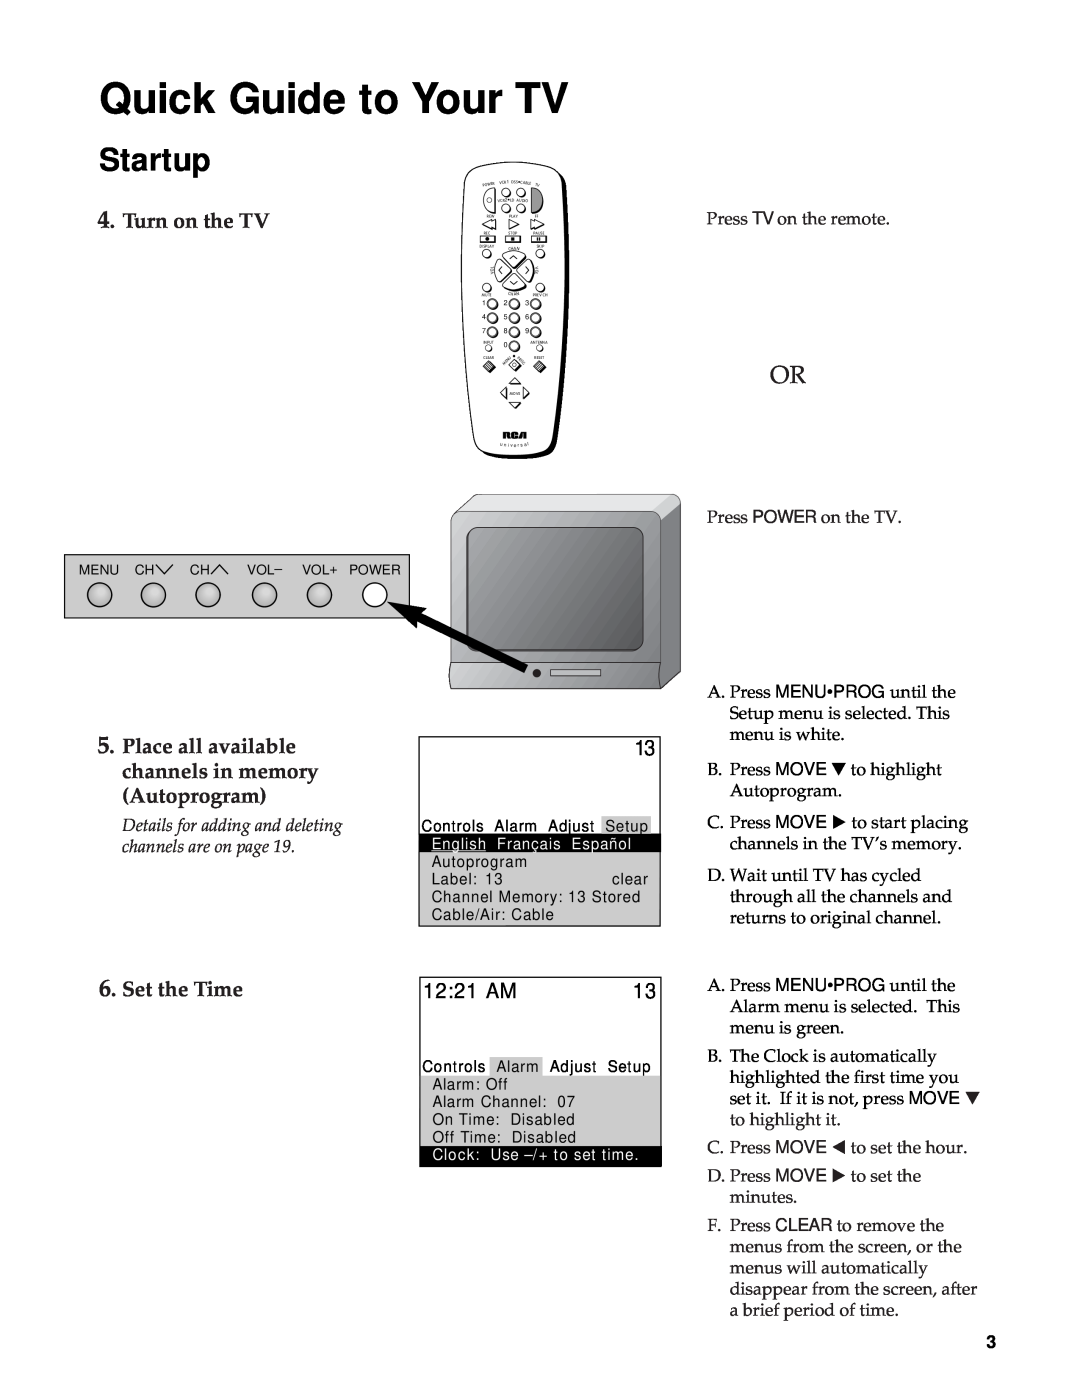 RCA Color TV Quick Guide to Your TV, Startup, Turn on the TV, Place all available channels in memory Autoprogram, 1221 AM 